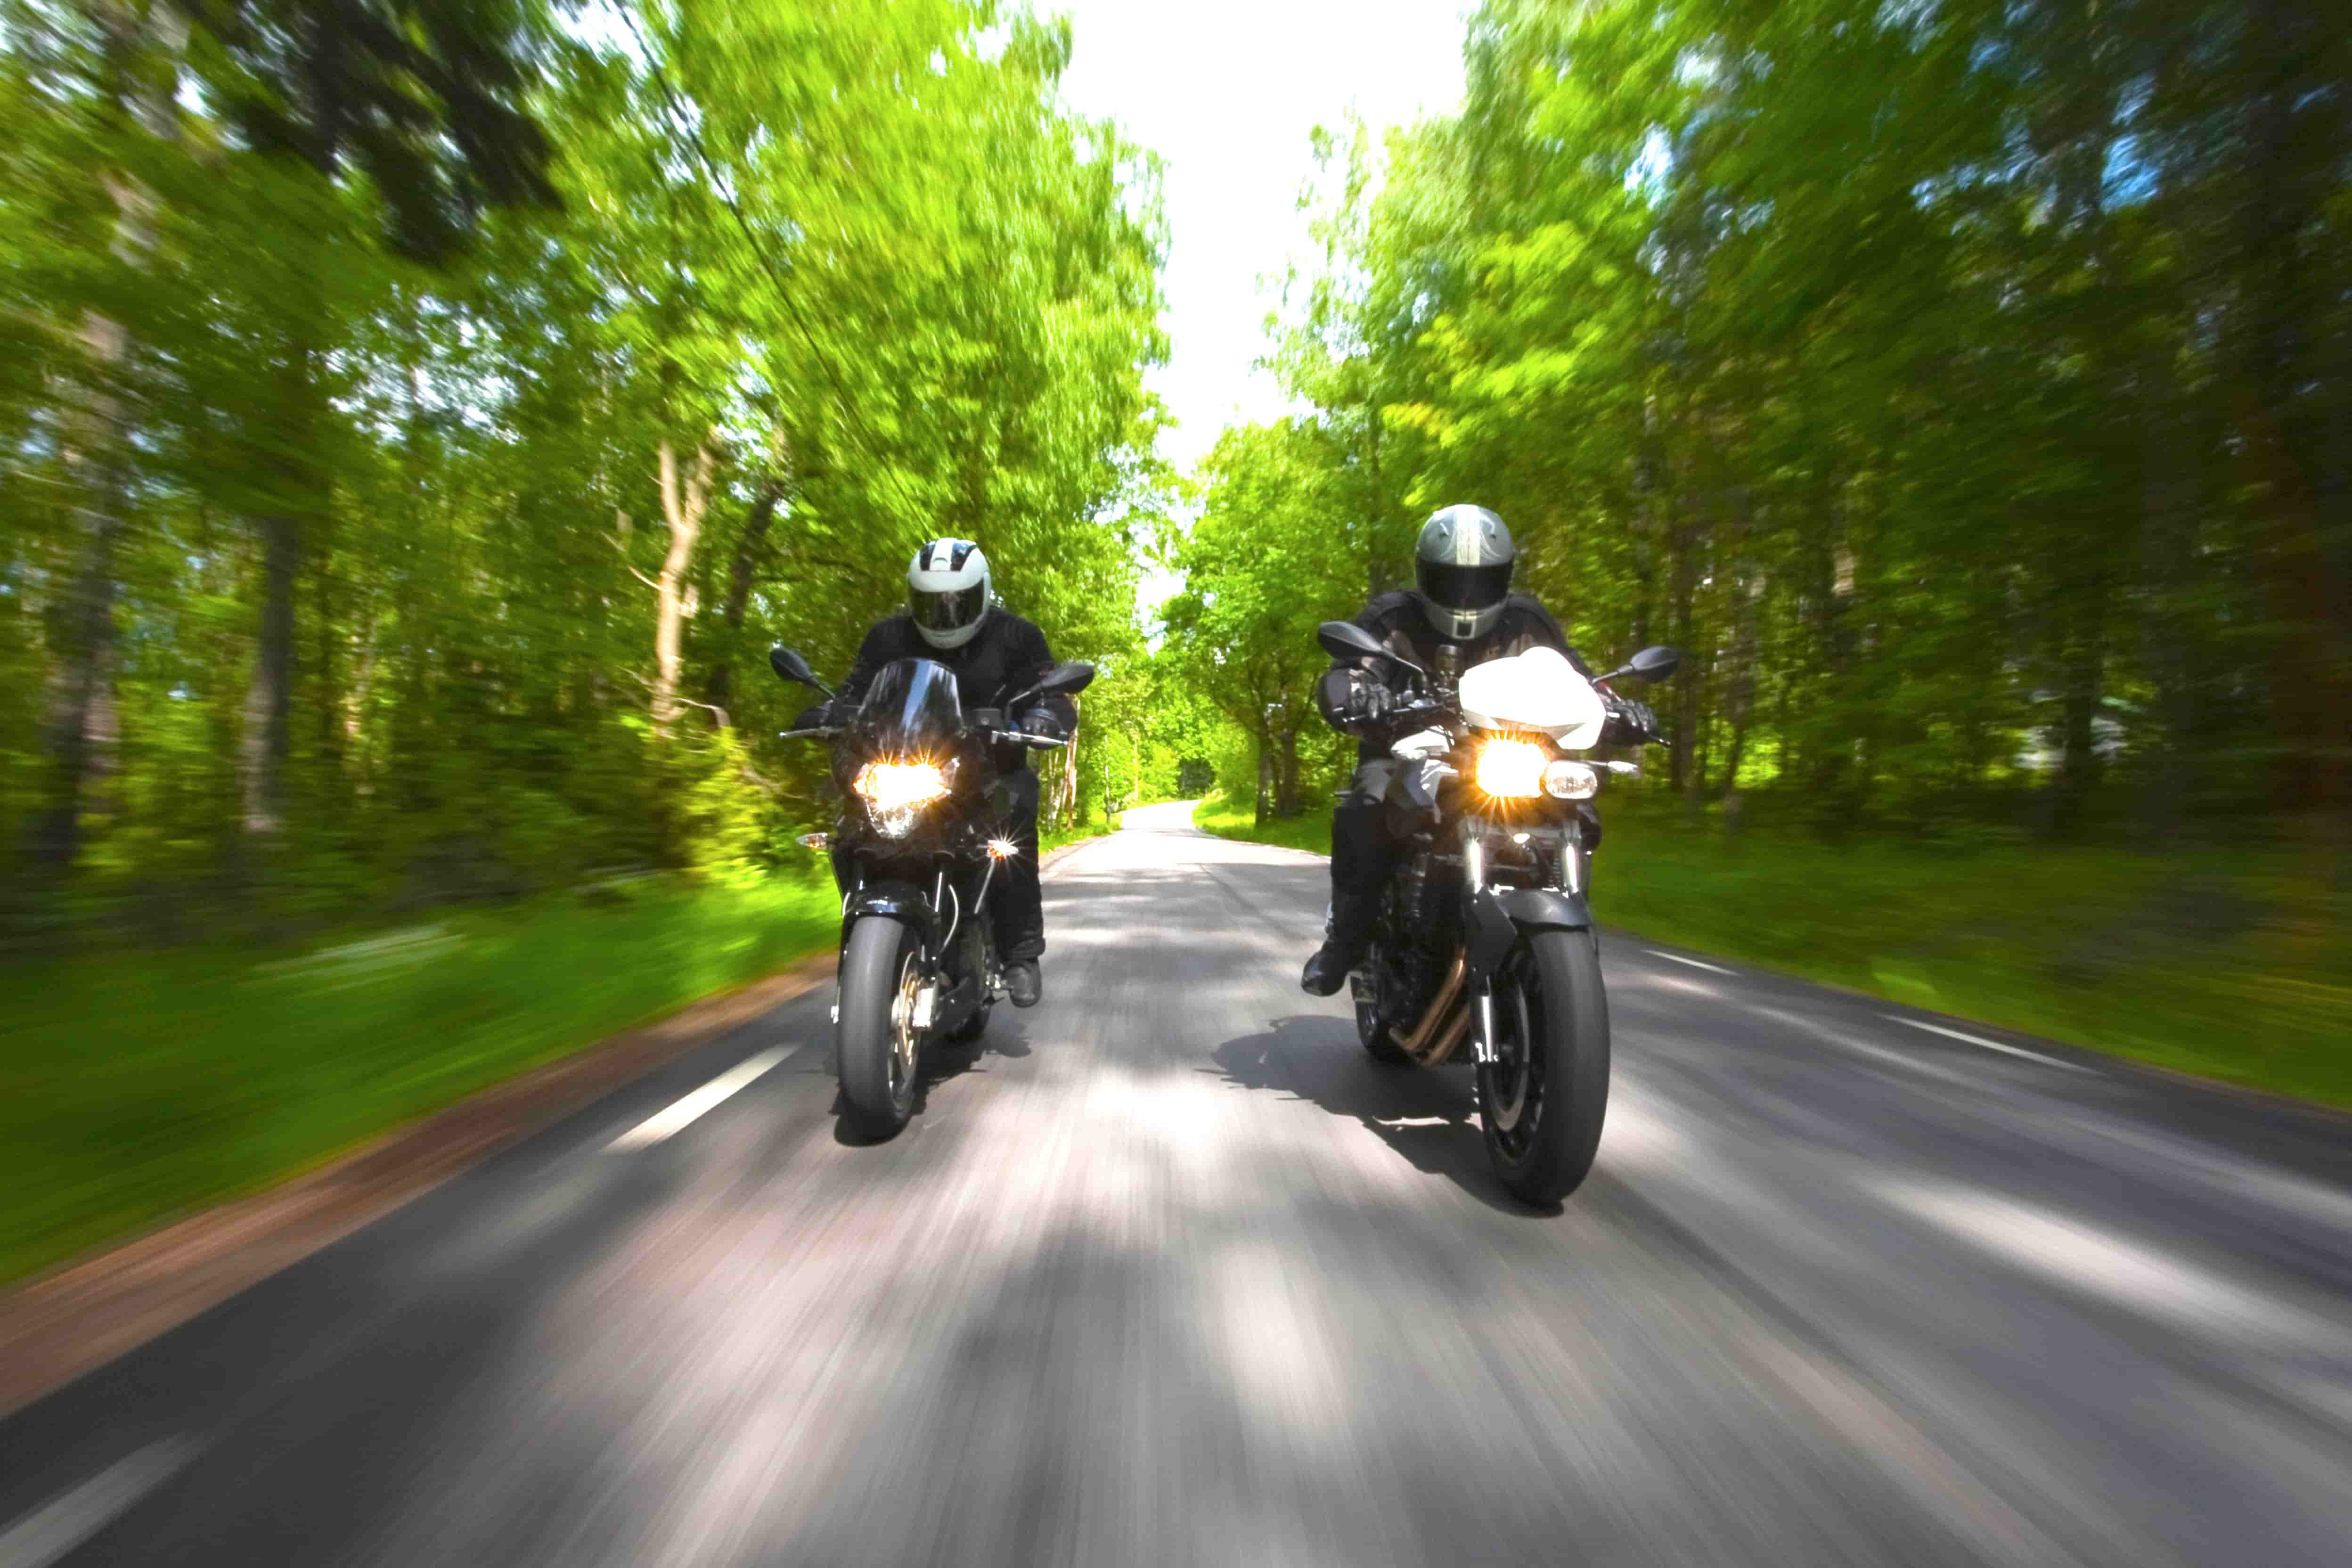 Riding a motorcycle as a couple or with friends has many advantages.